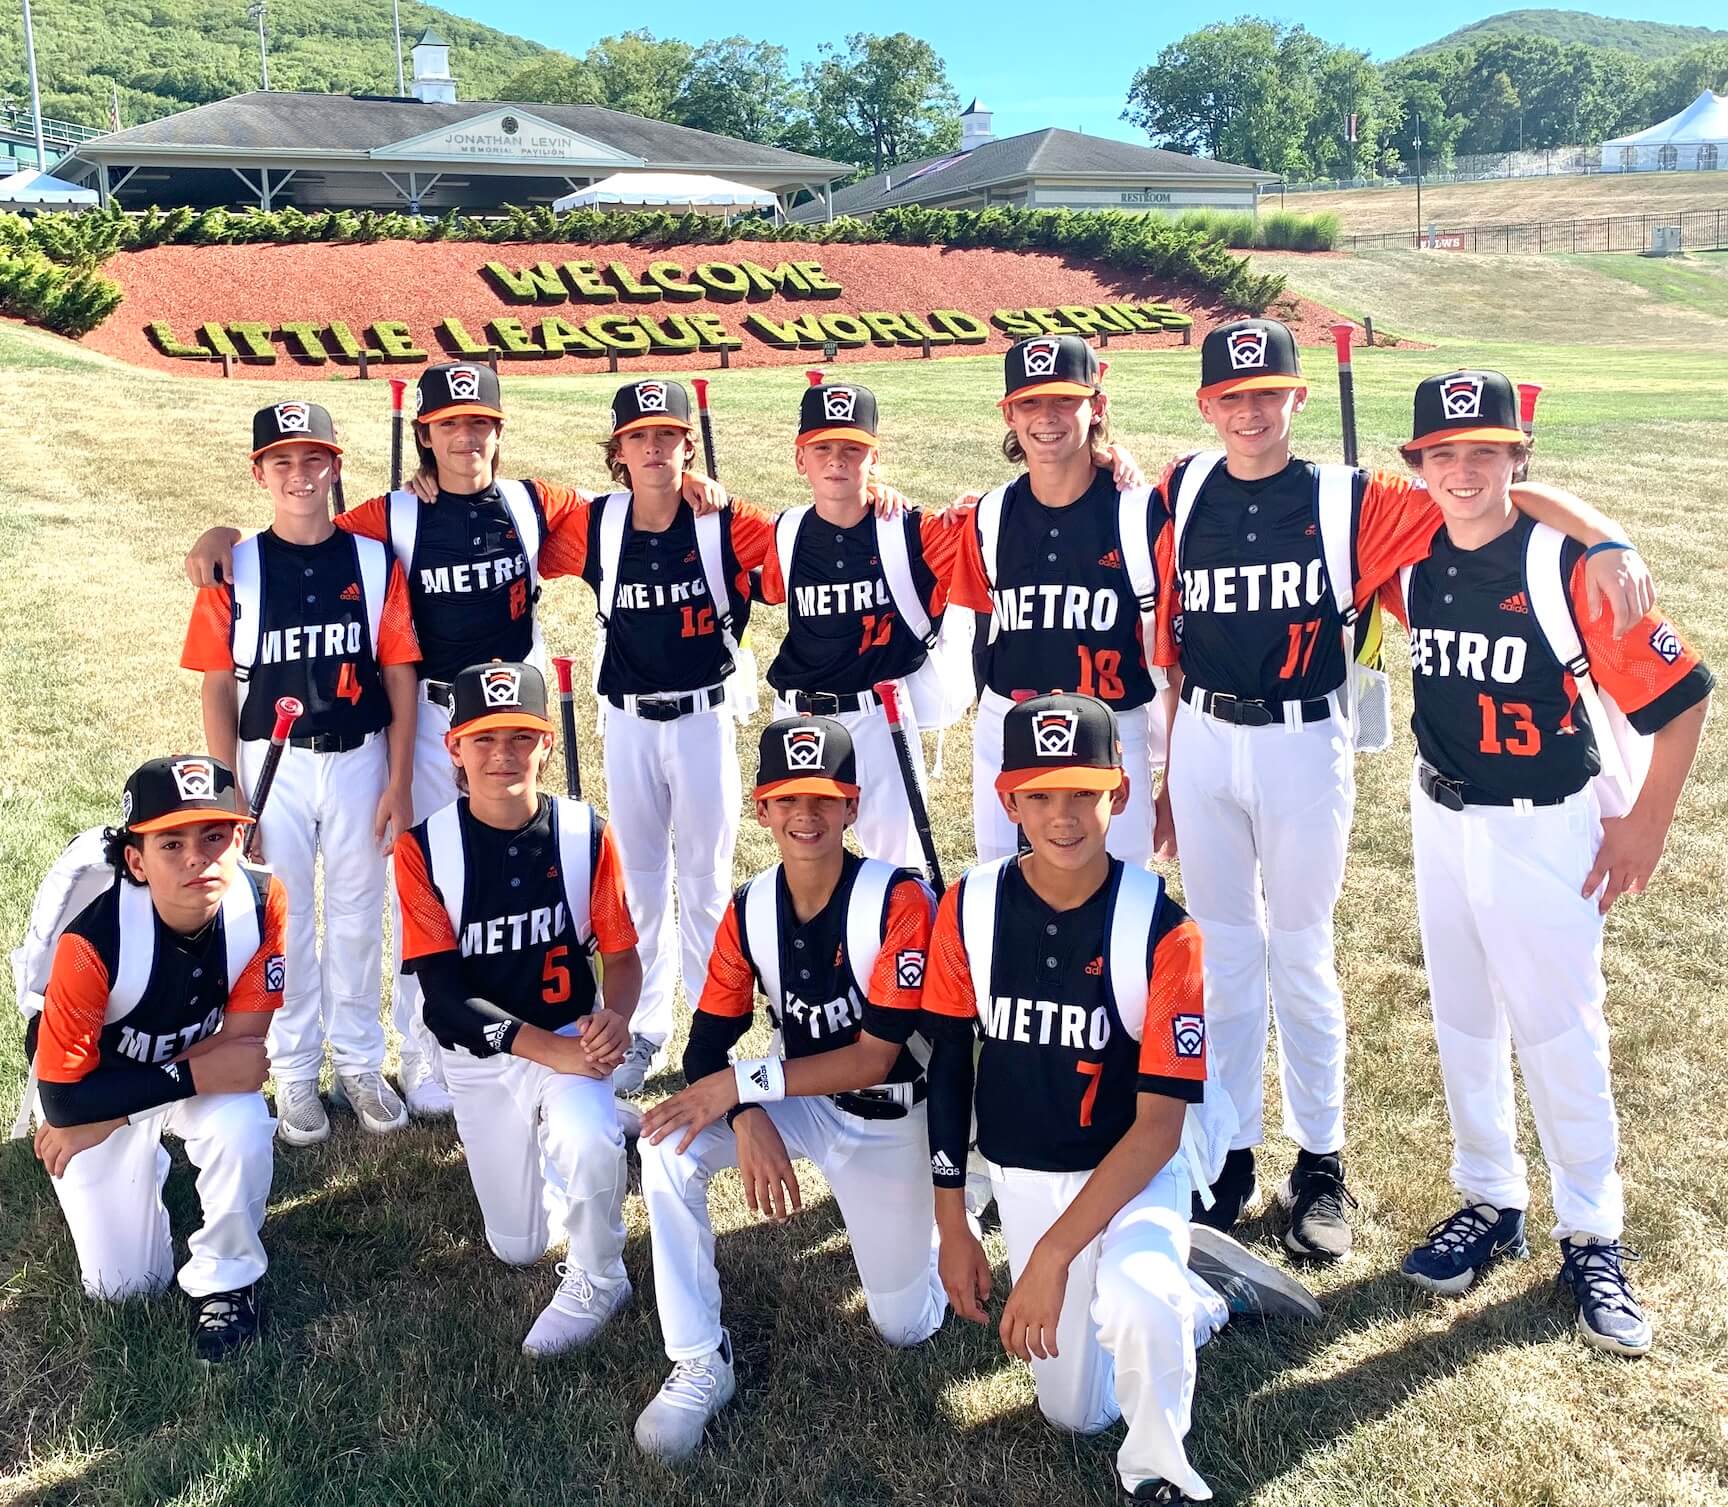 Championship Little League Teams Honored By Toms River - Jersey Shore Online